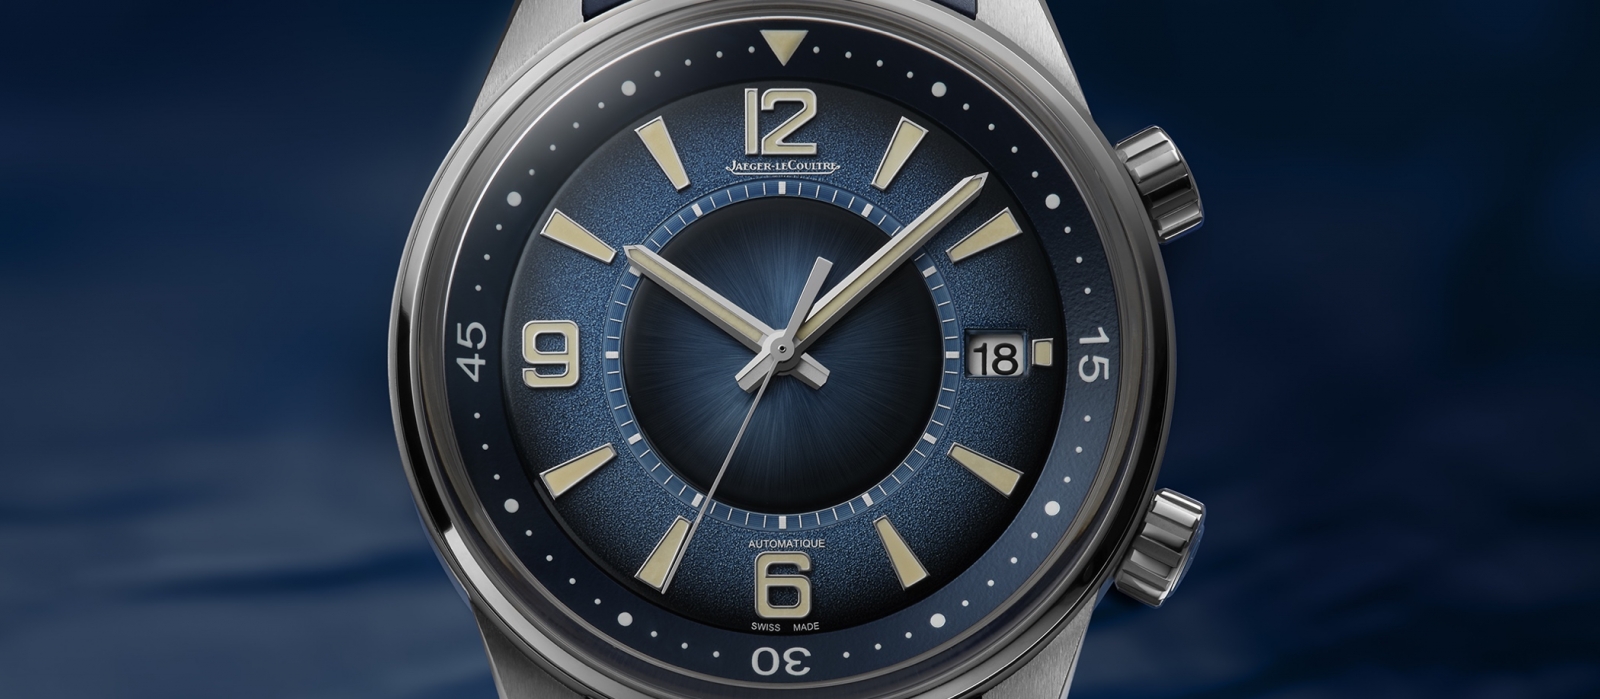 Jaeger-LeCoultre Polaris Date Limited Edition